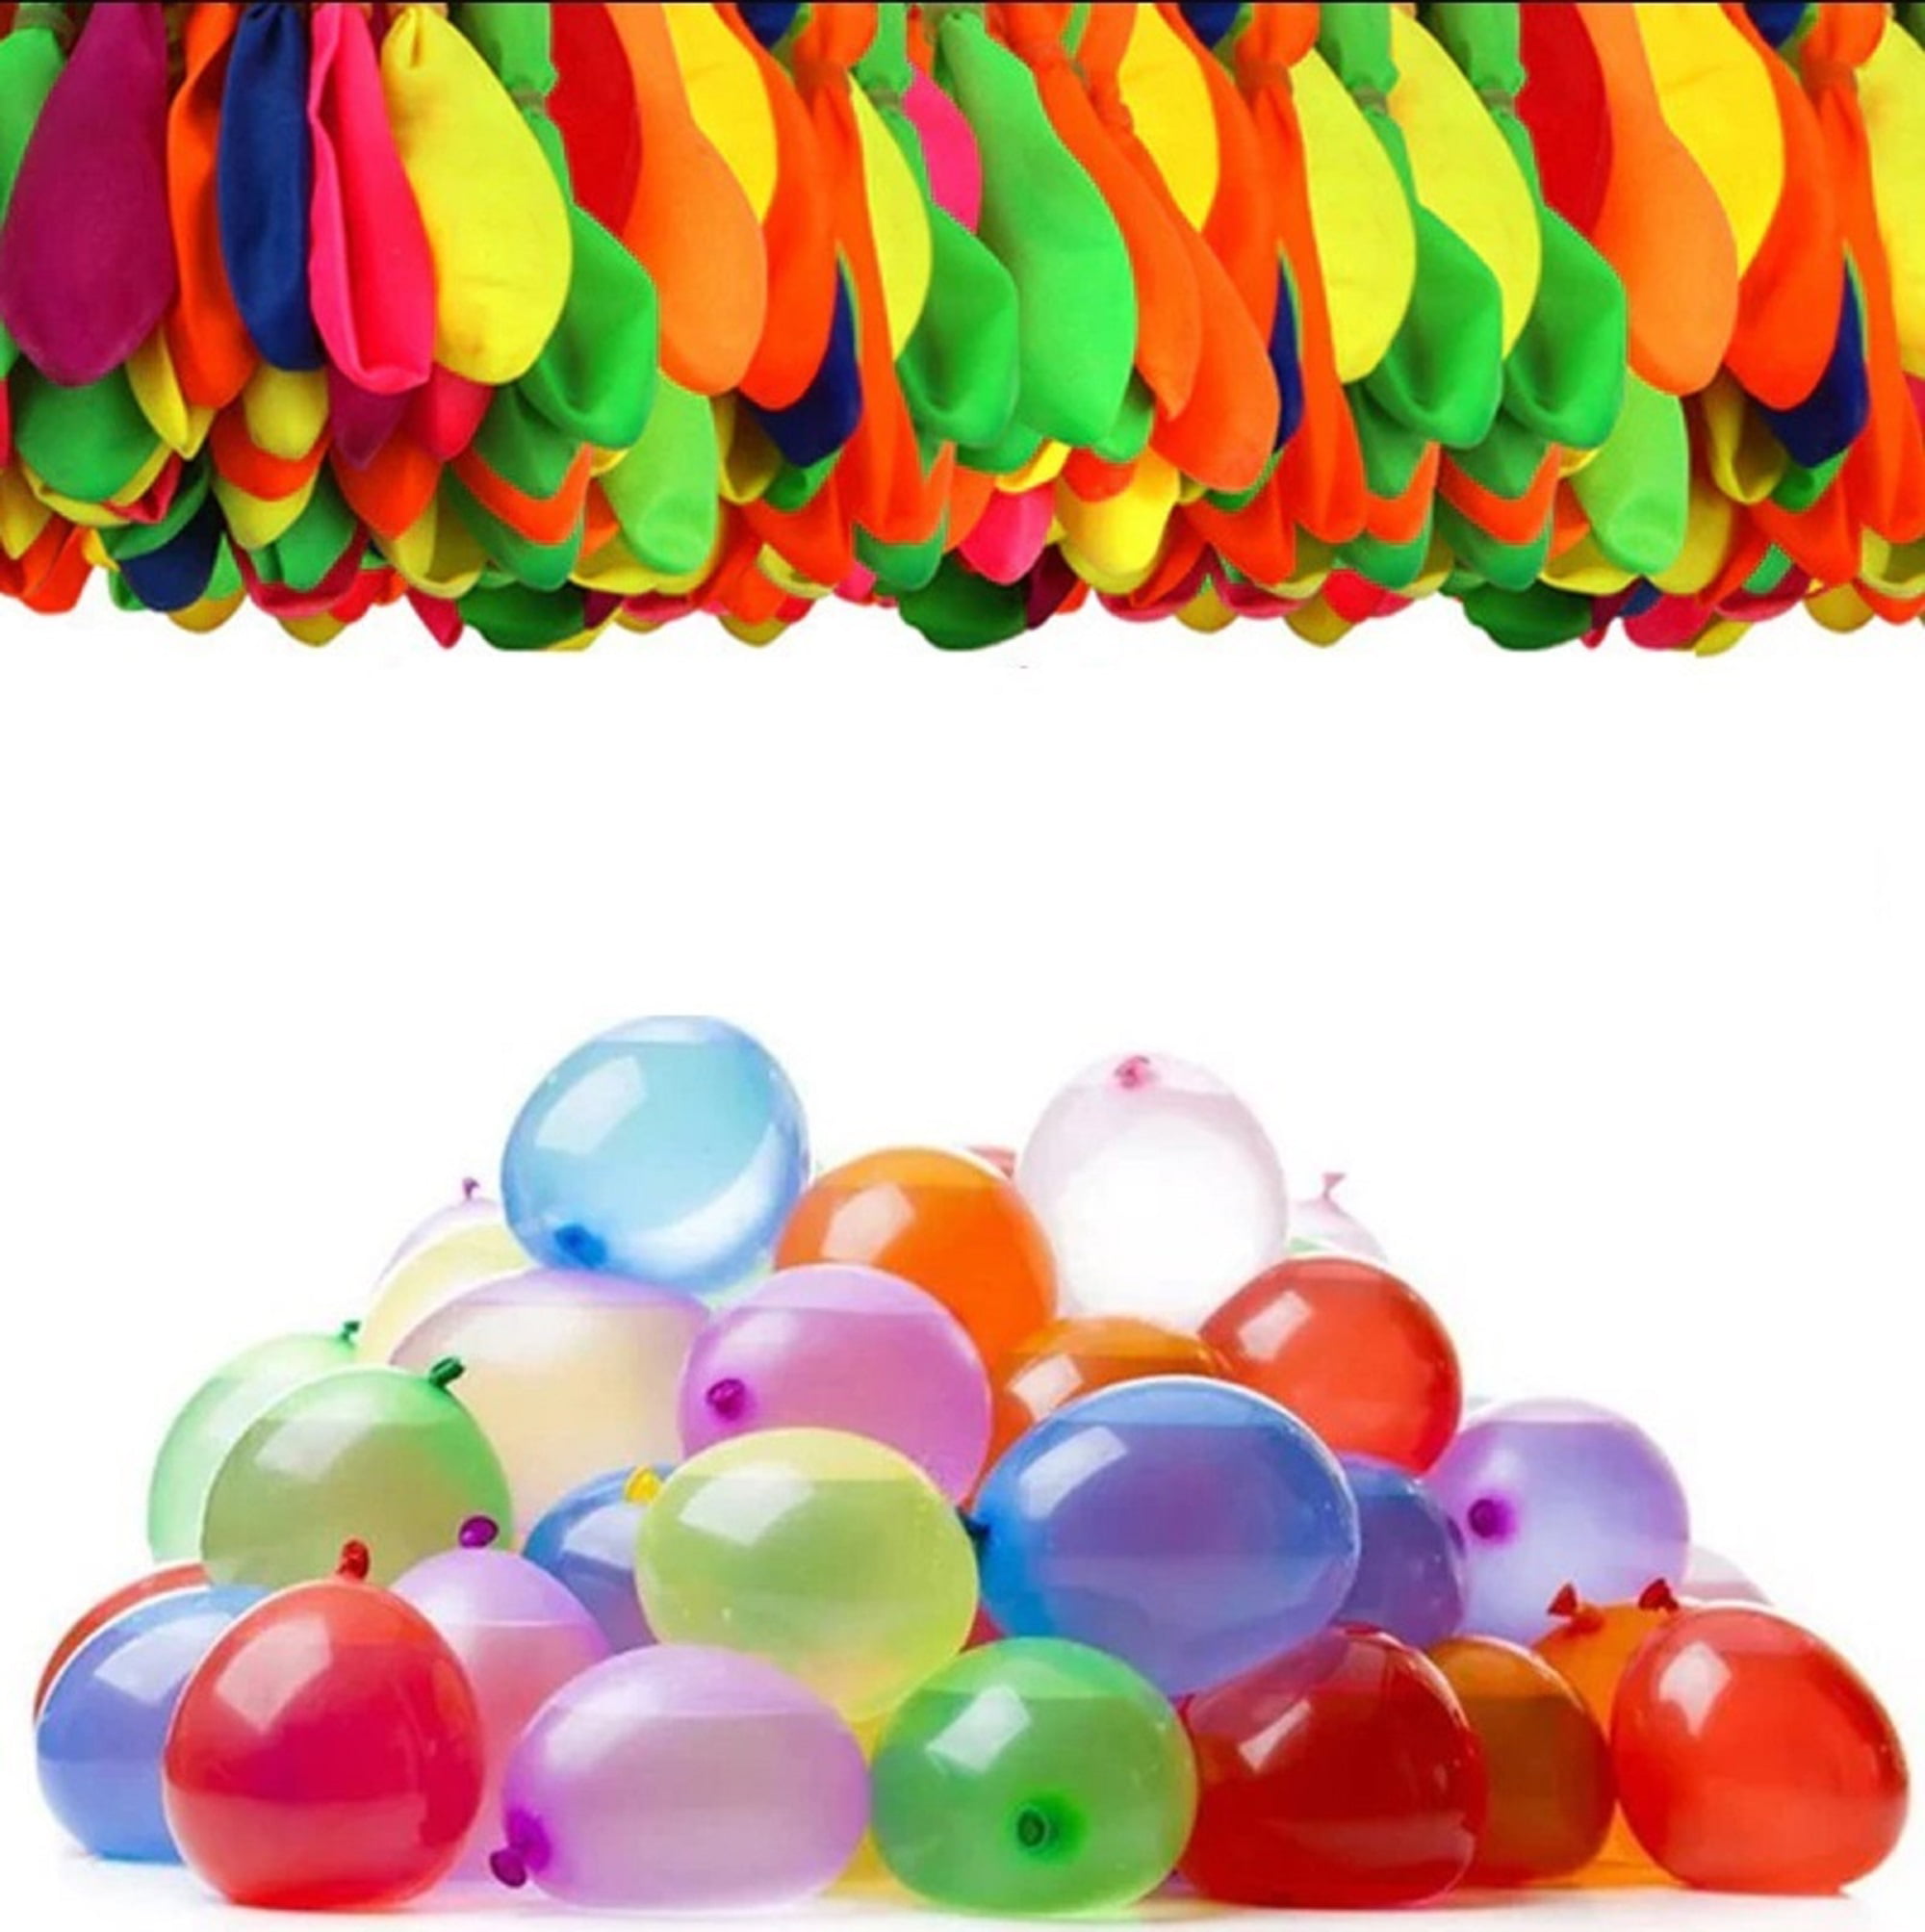 ZURU Bunch-o-balloons 3 Random Colour Foil Fill 100 Water Balloons in 60 Seconds for sale online 